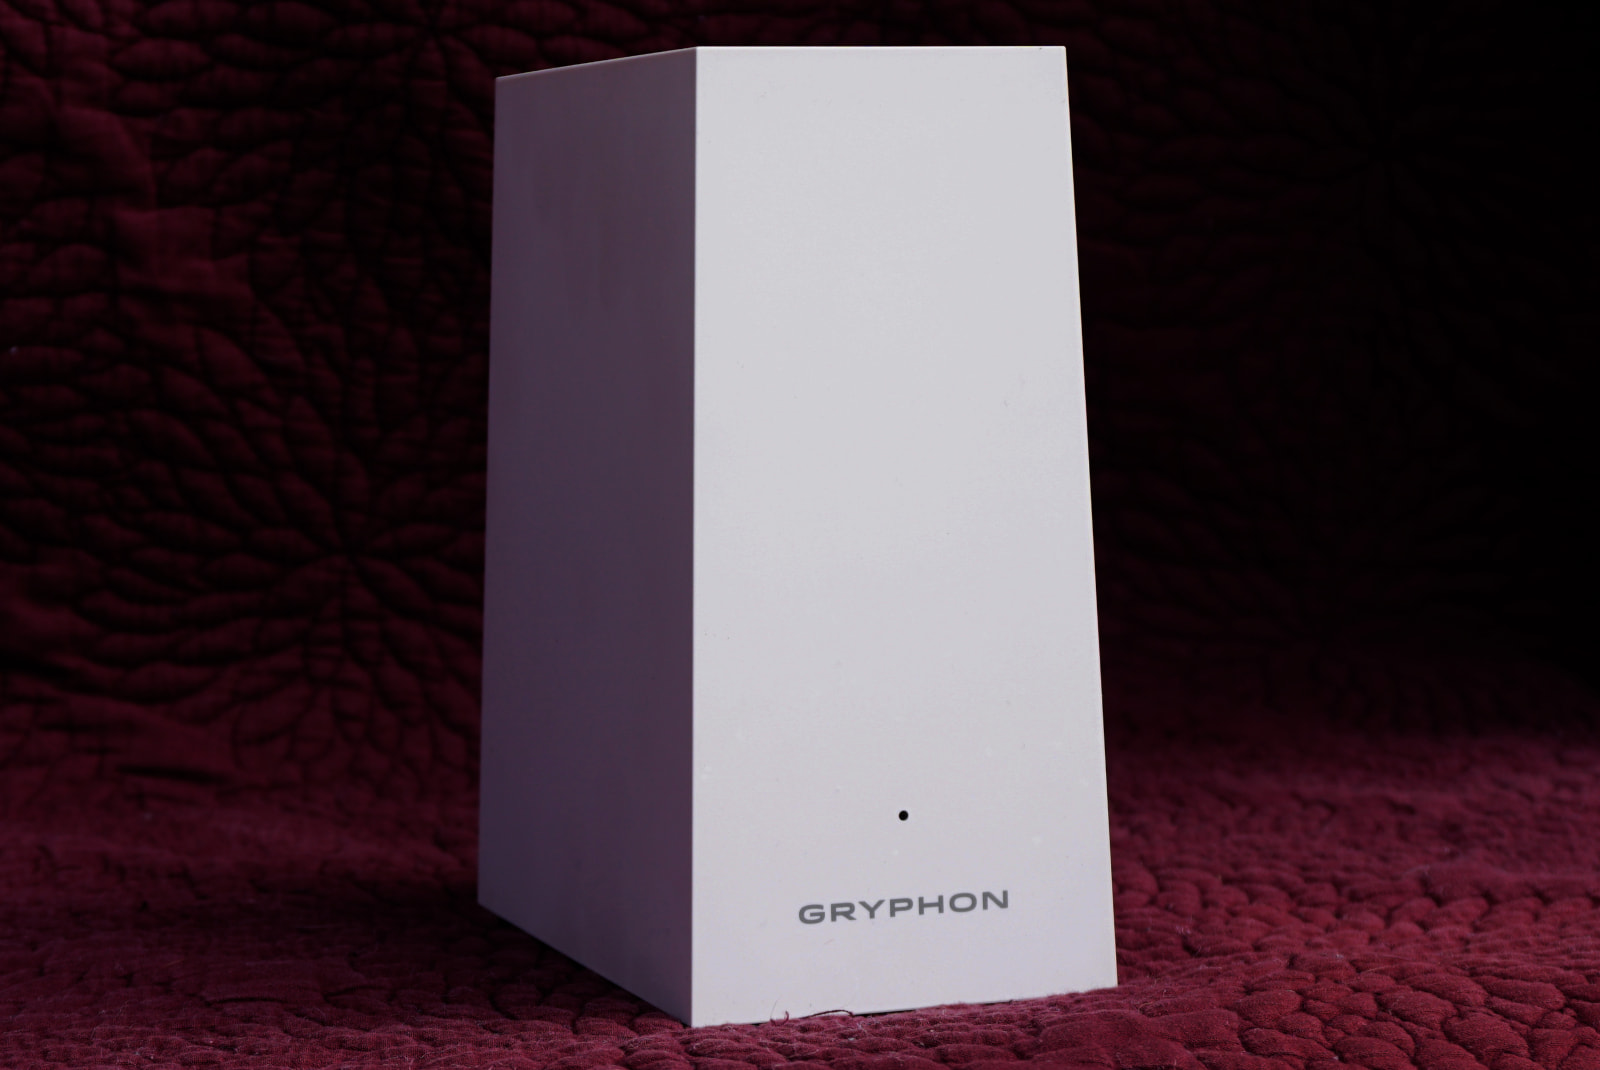 Side shot of Gryphon AX router